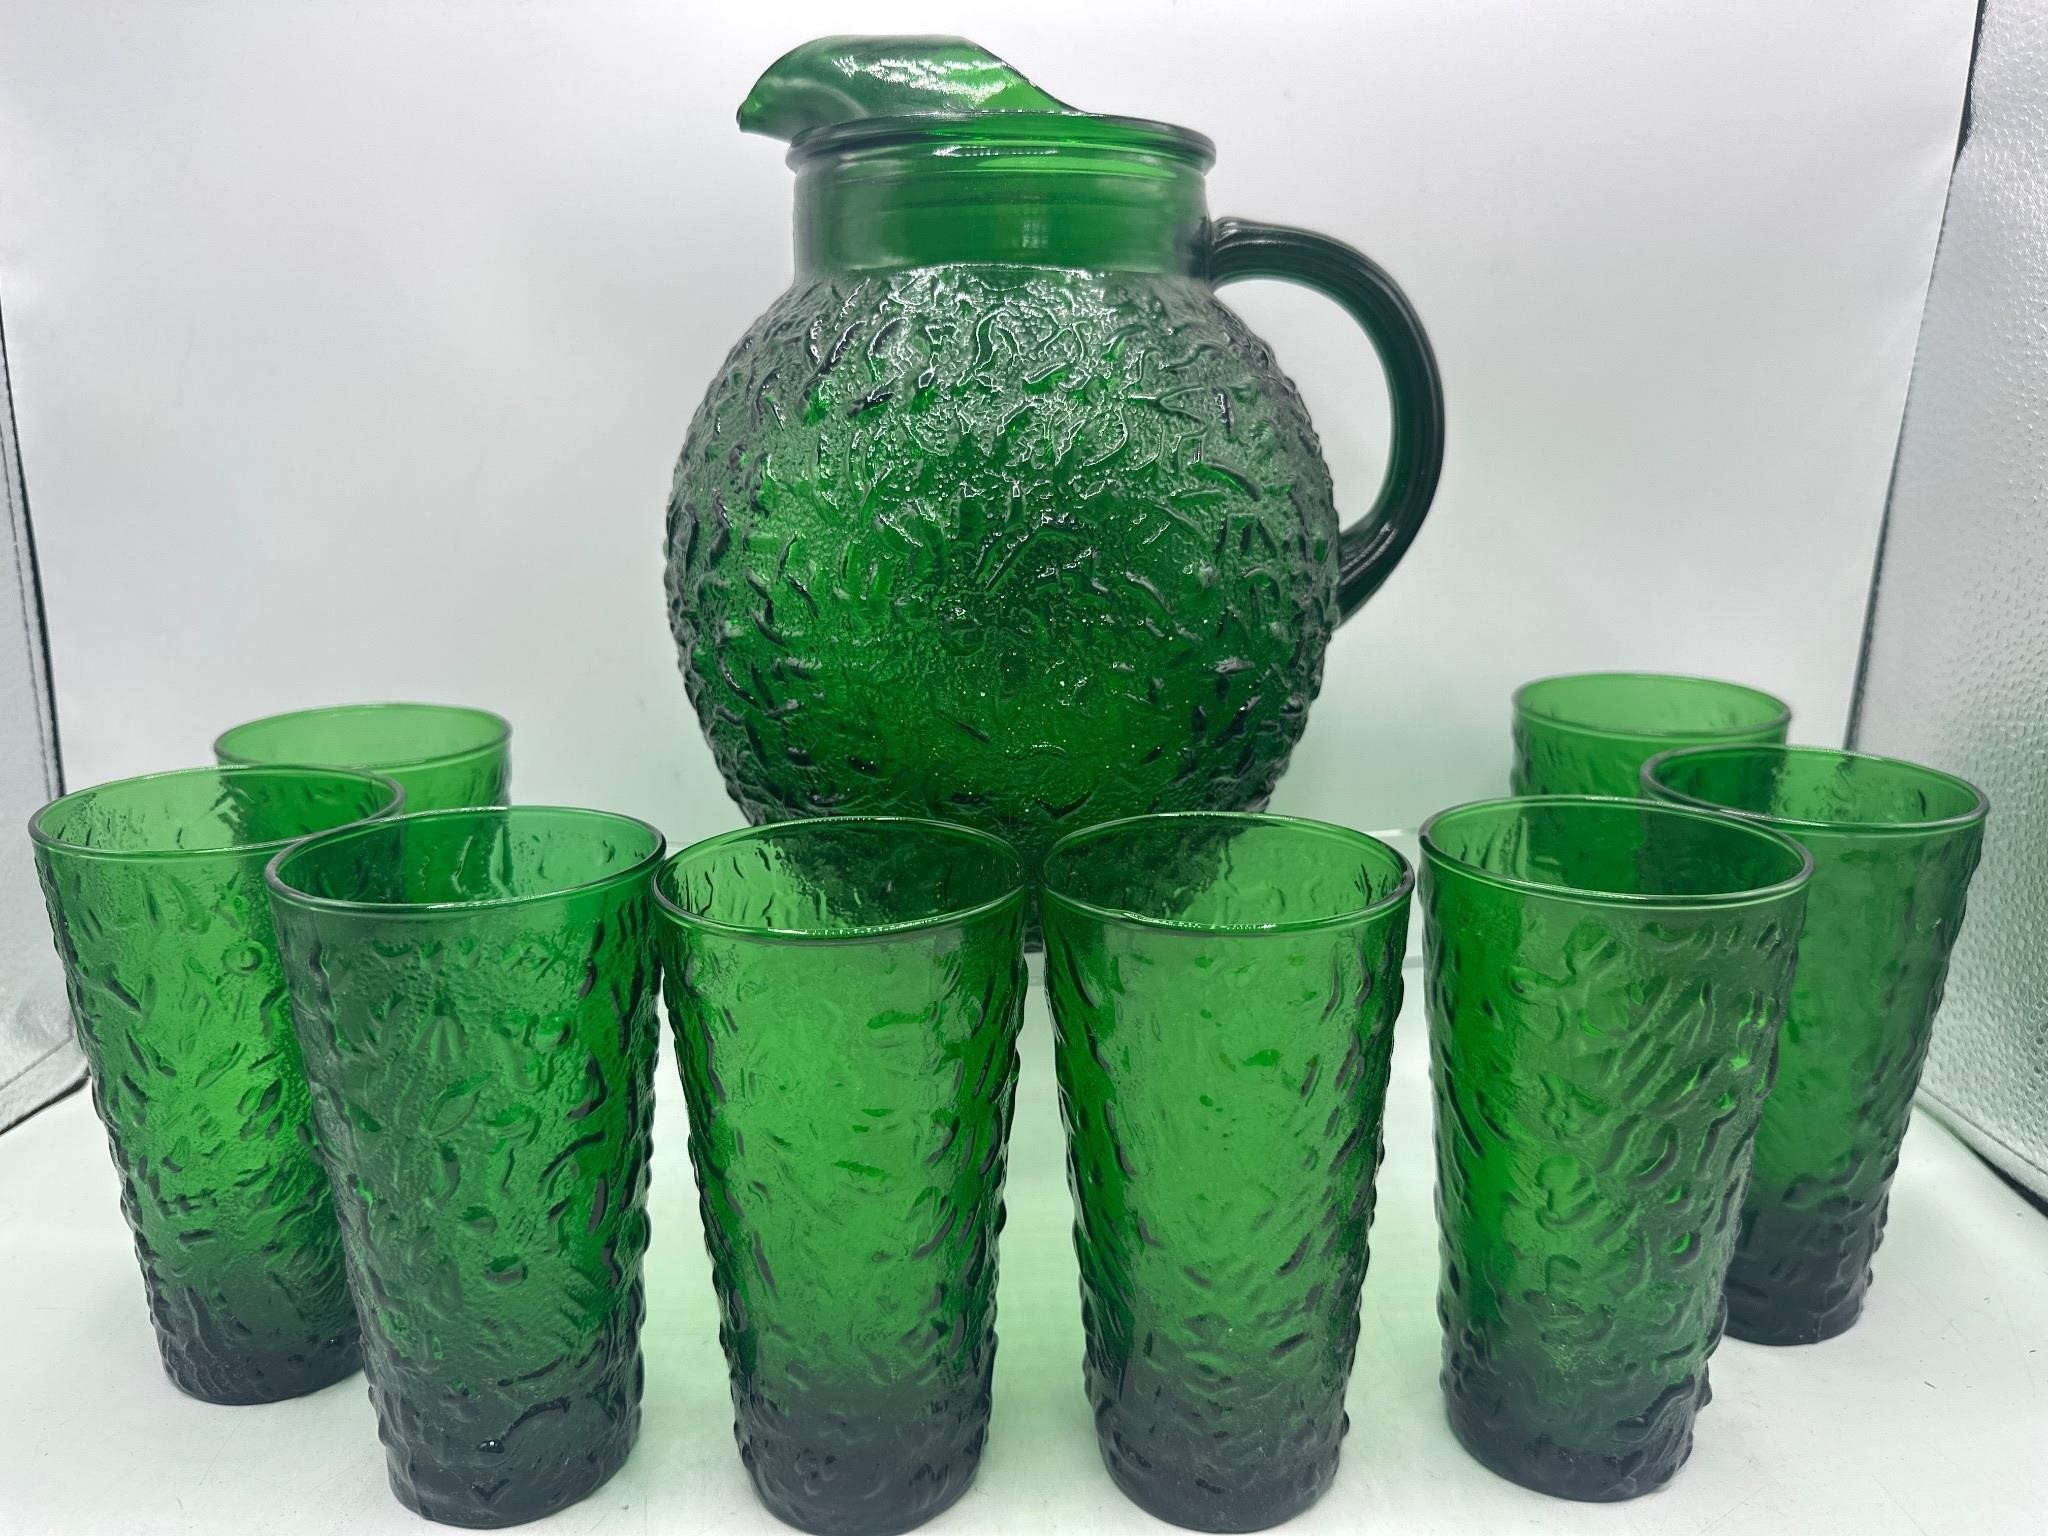 Vintage green glass pitcher and tumblers